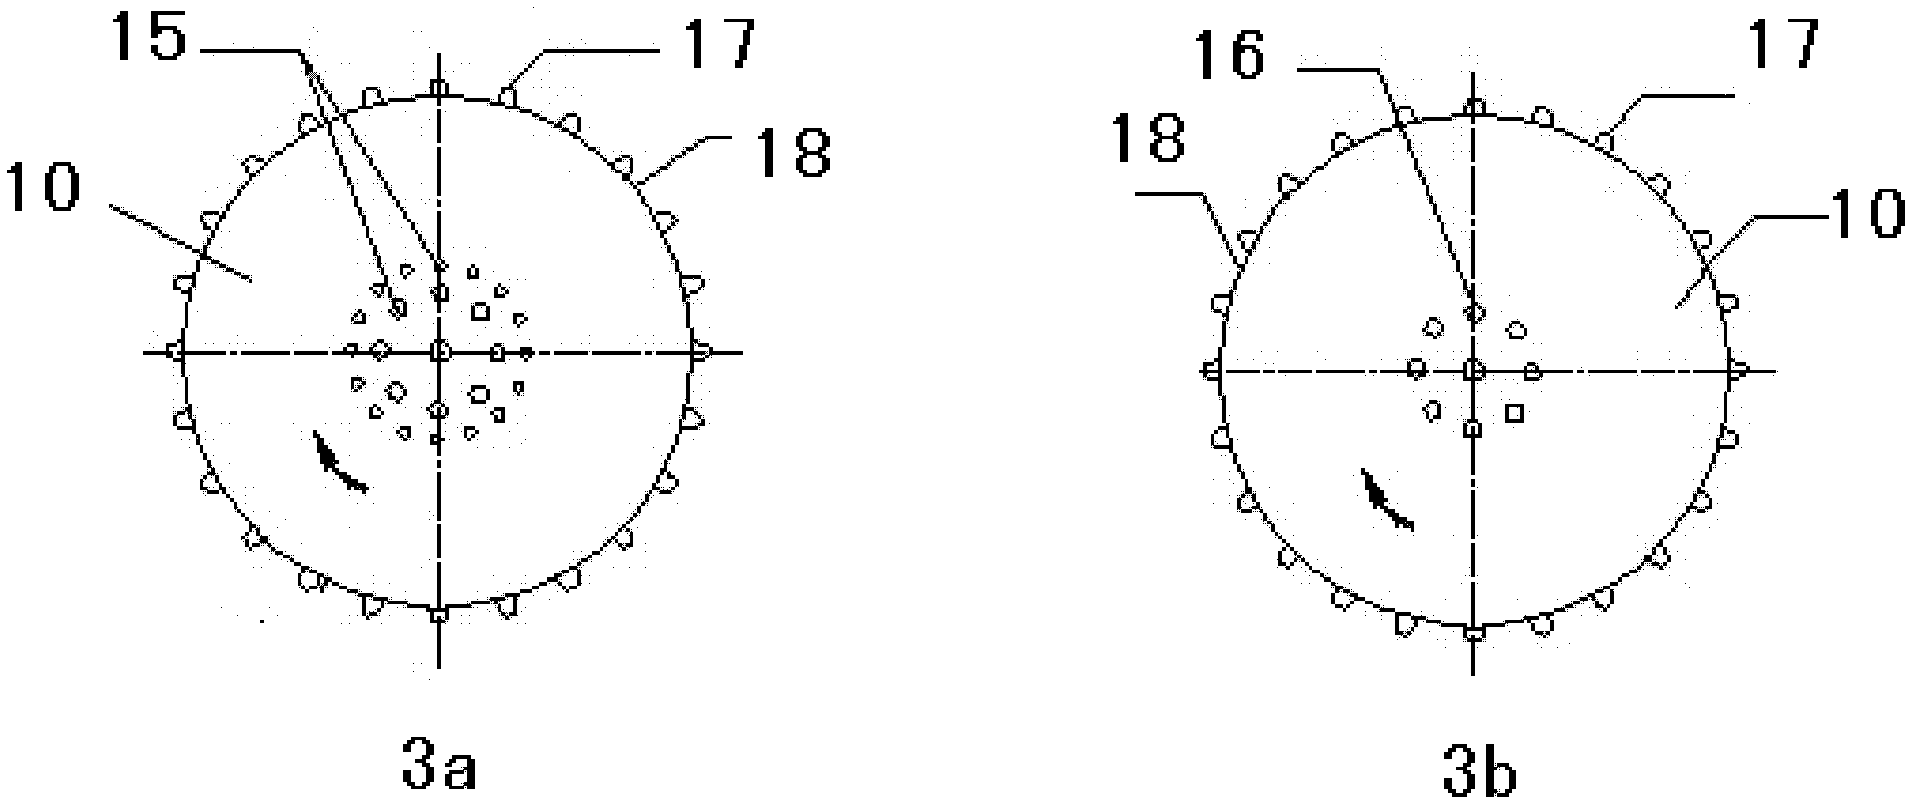 Biological disk, biological revolving drum and integrated revolving drum type domestic sewage treater